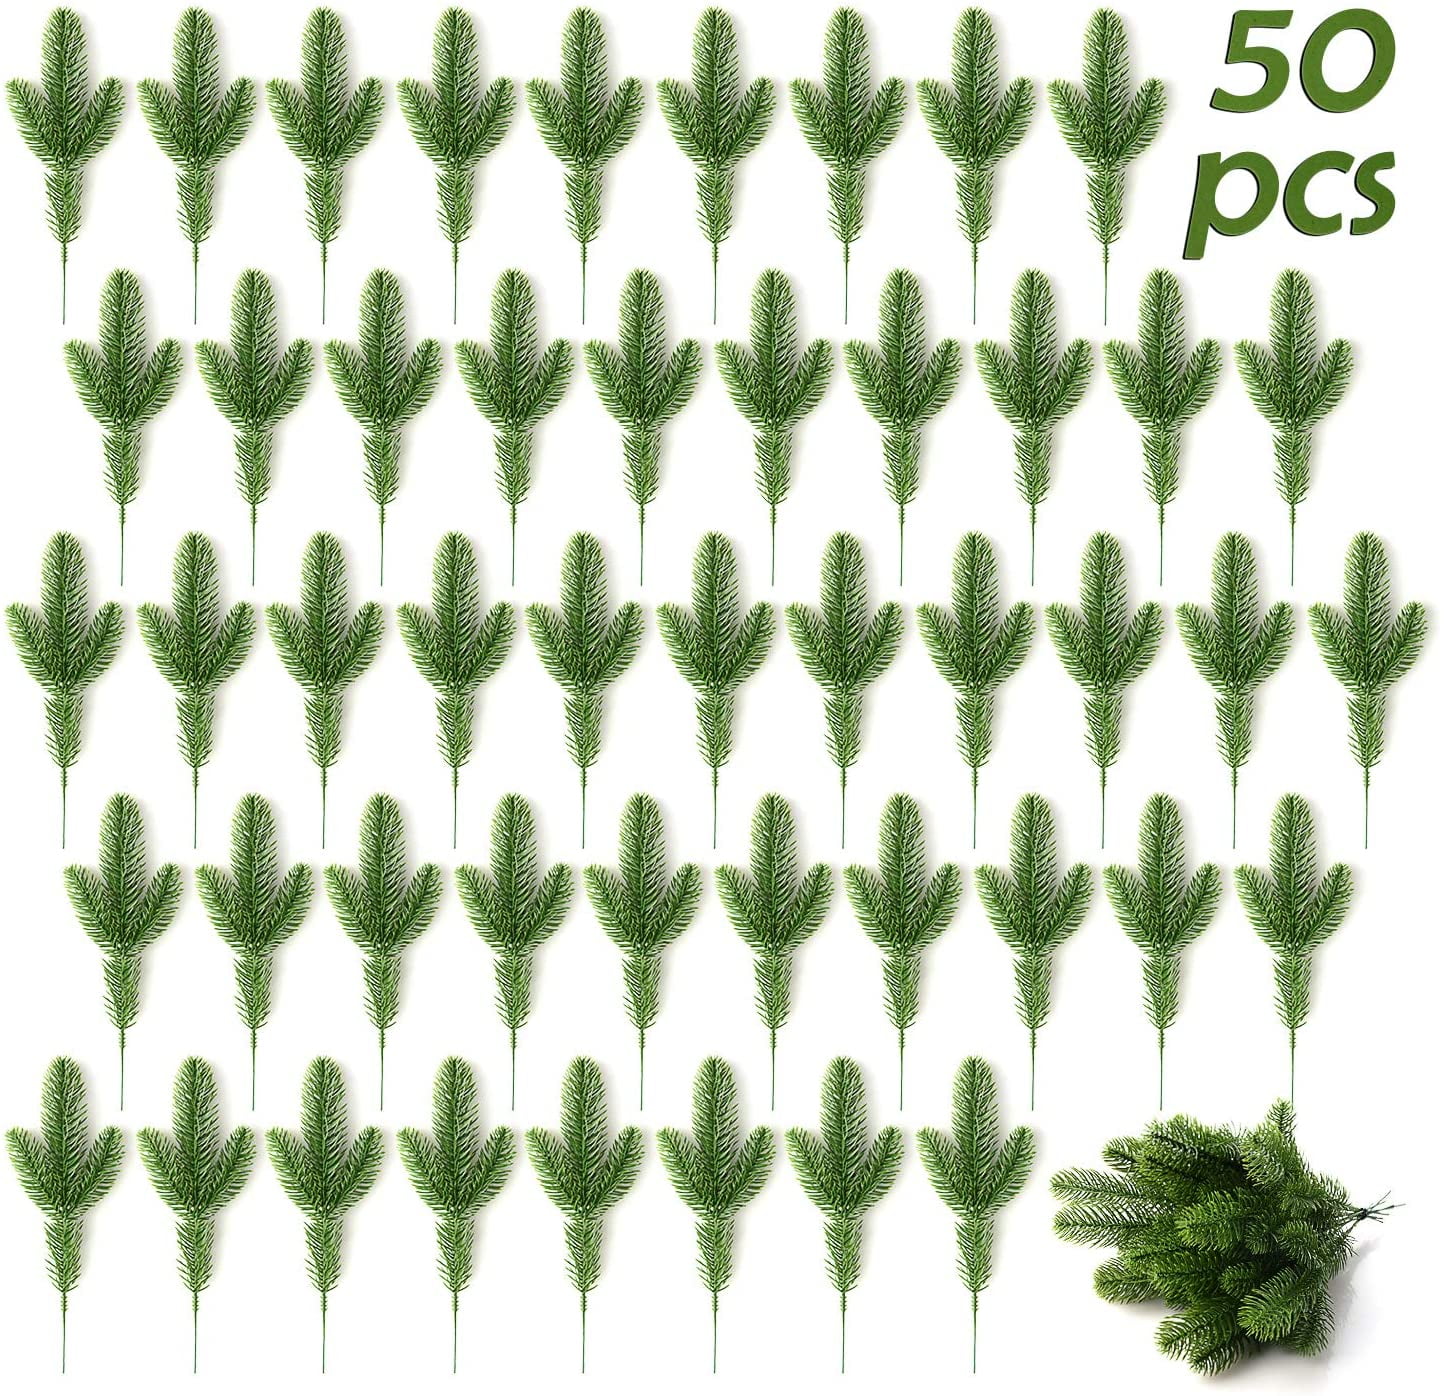 Moobom Artificial Pine Tree Branches 50-Pack Green Plants Pine Needles DIY Accessories for Garland Wreath Christmas Embellishing and Home Garden Decor